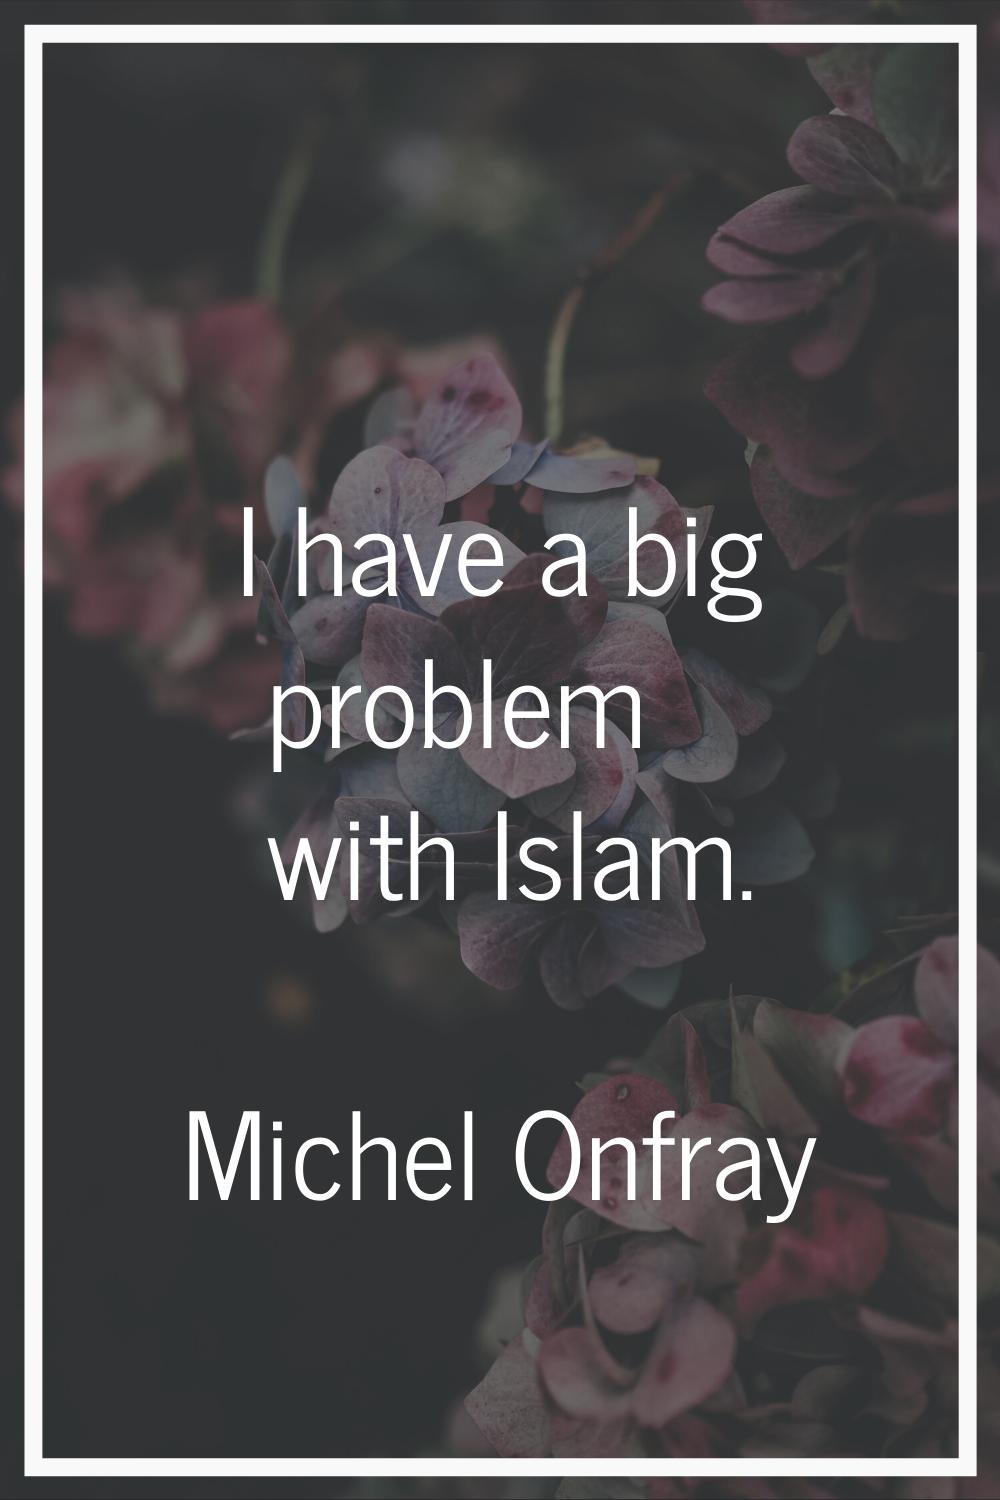 I have a big problem with Islam.